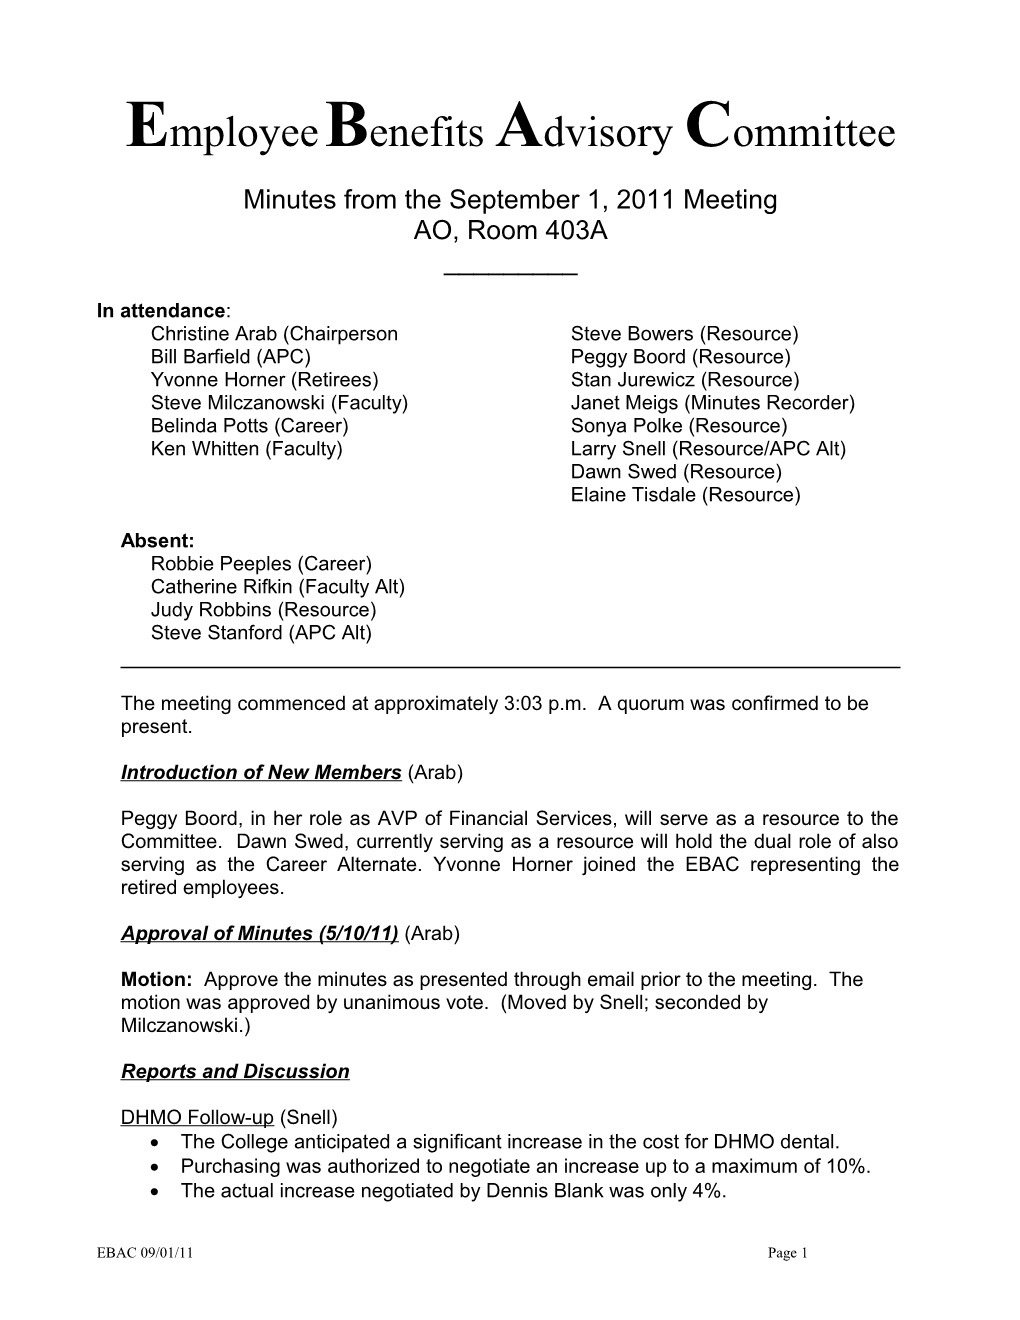 Minutes from the September 1, 2011 Meeting